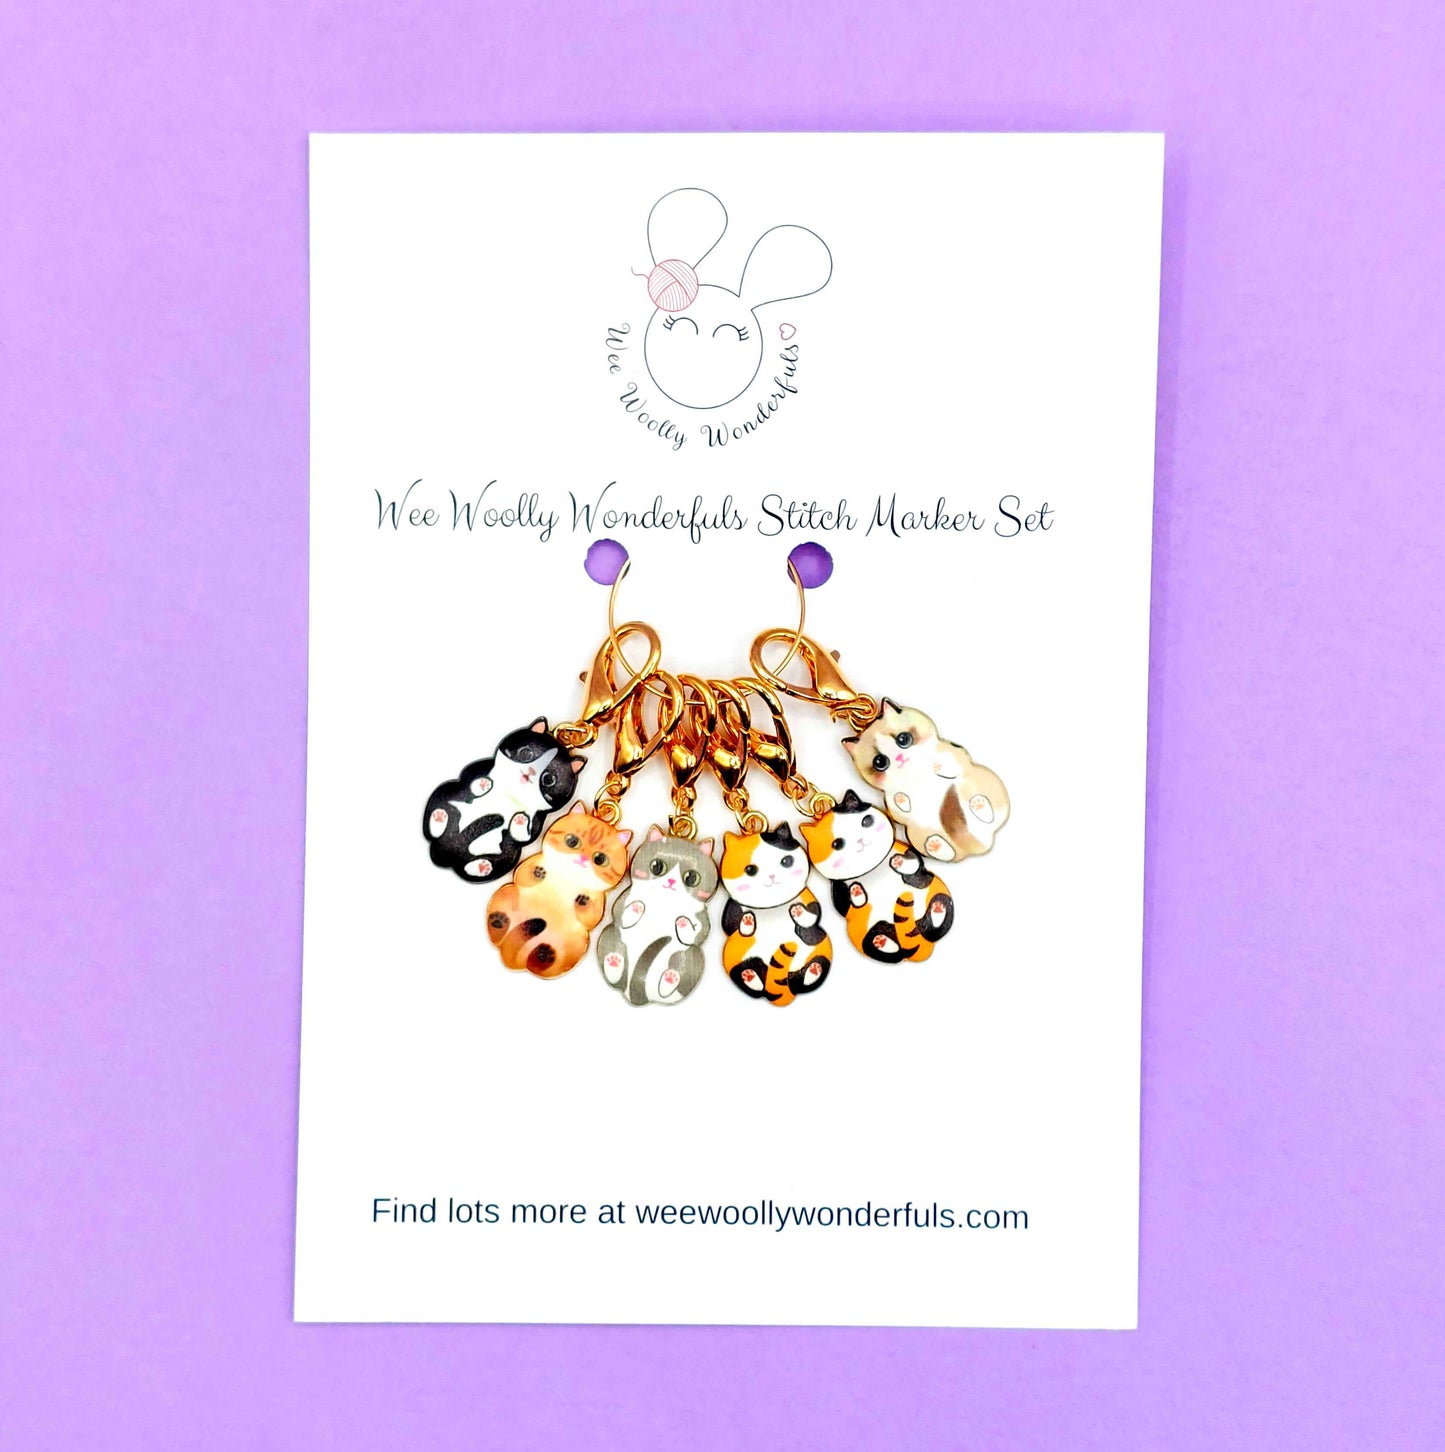 Adorable Stitch Markers Sets - Bee and Daisies, Rainbows, Fruit, Sheep, Cats, and Christmas Stitch Marker sets